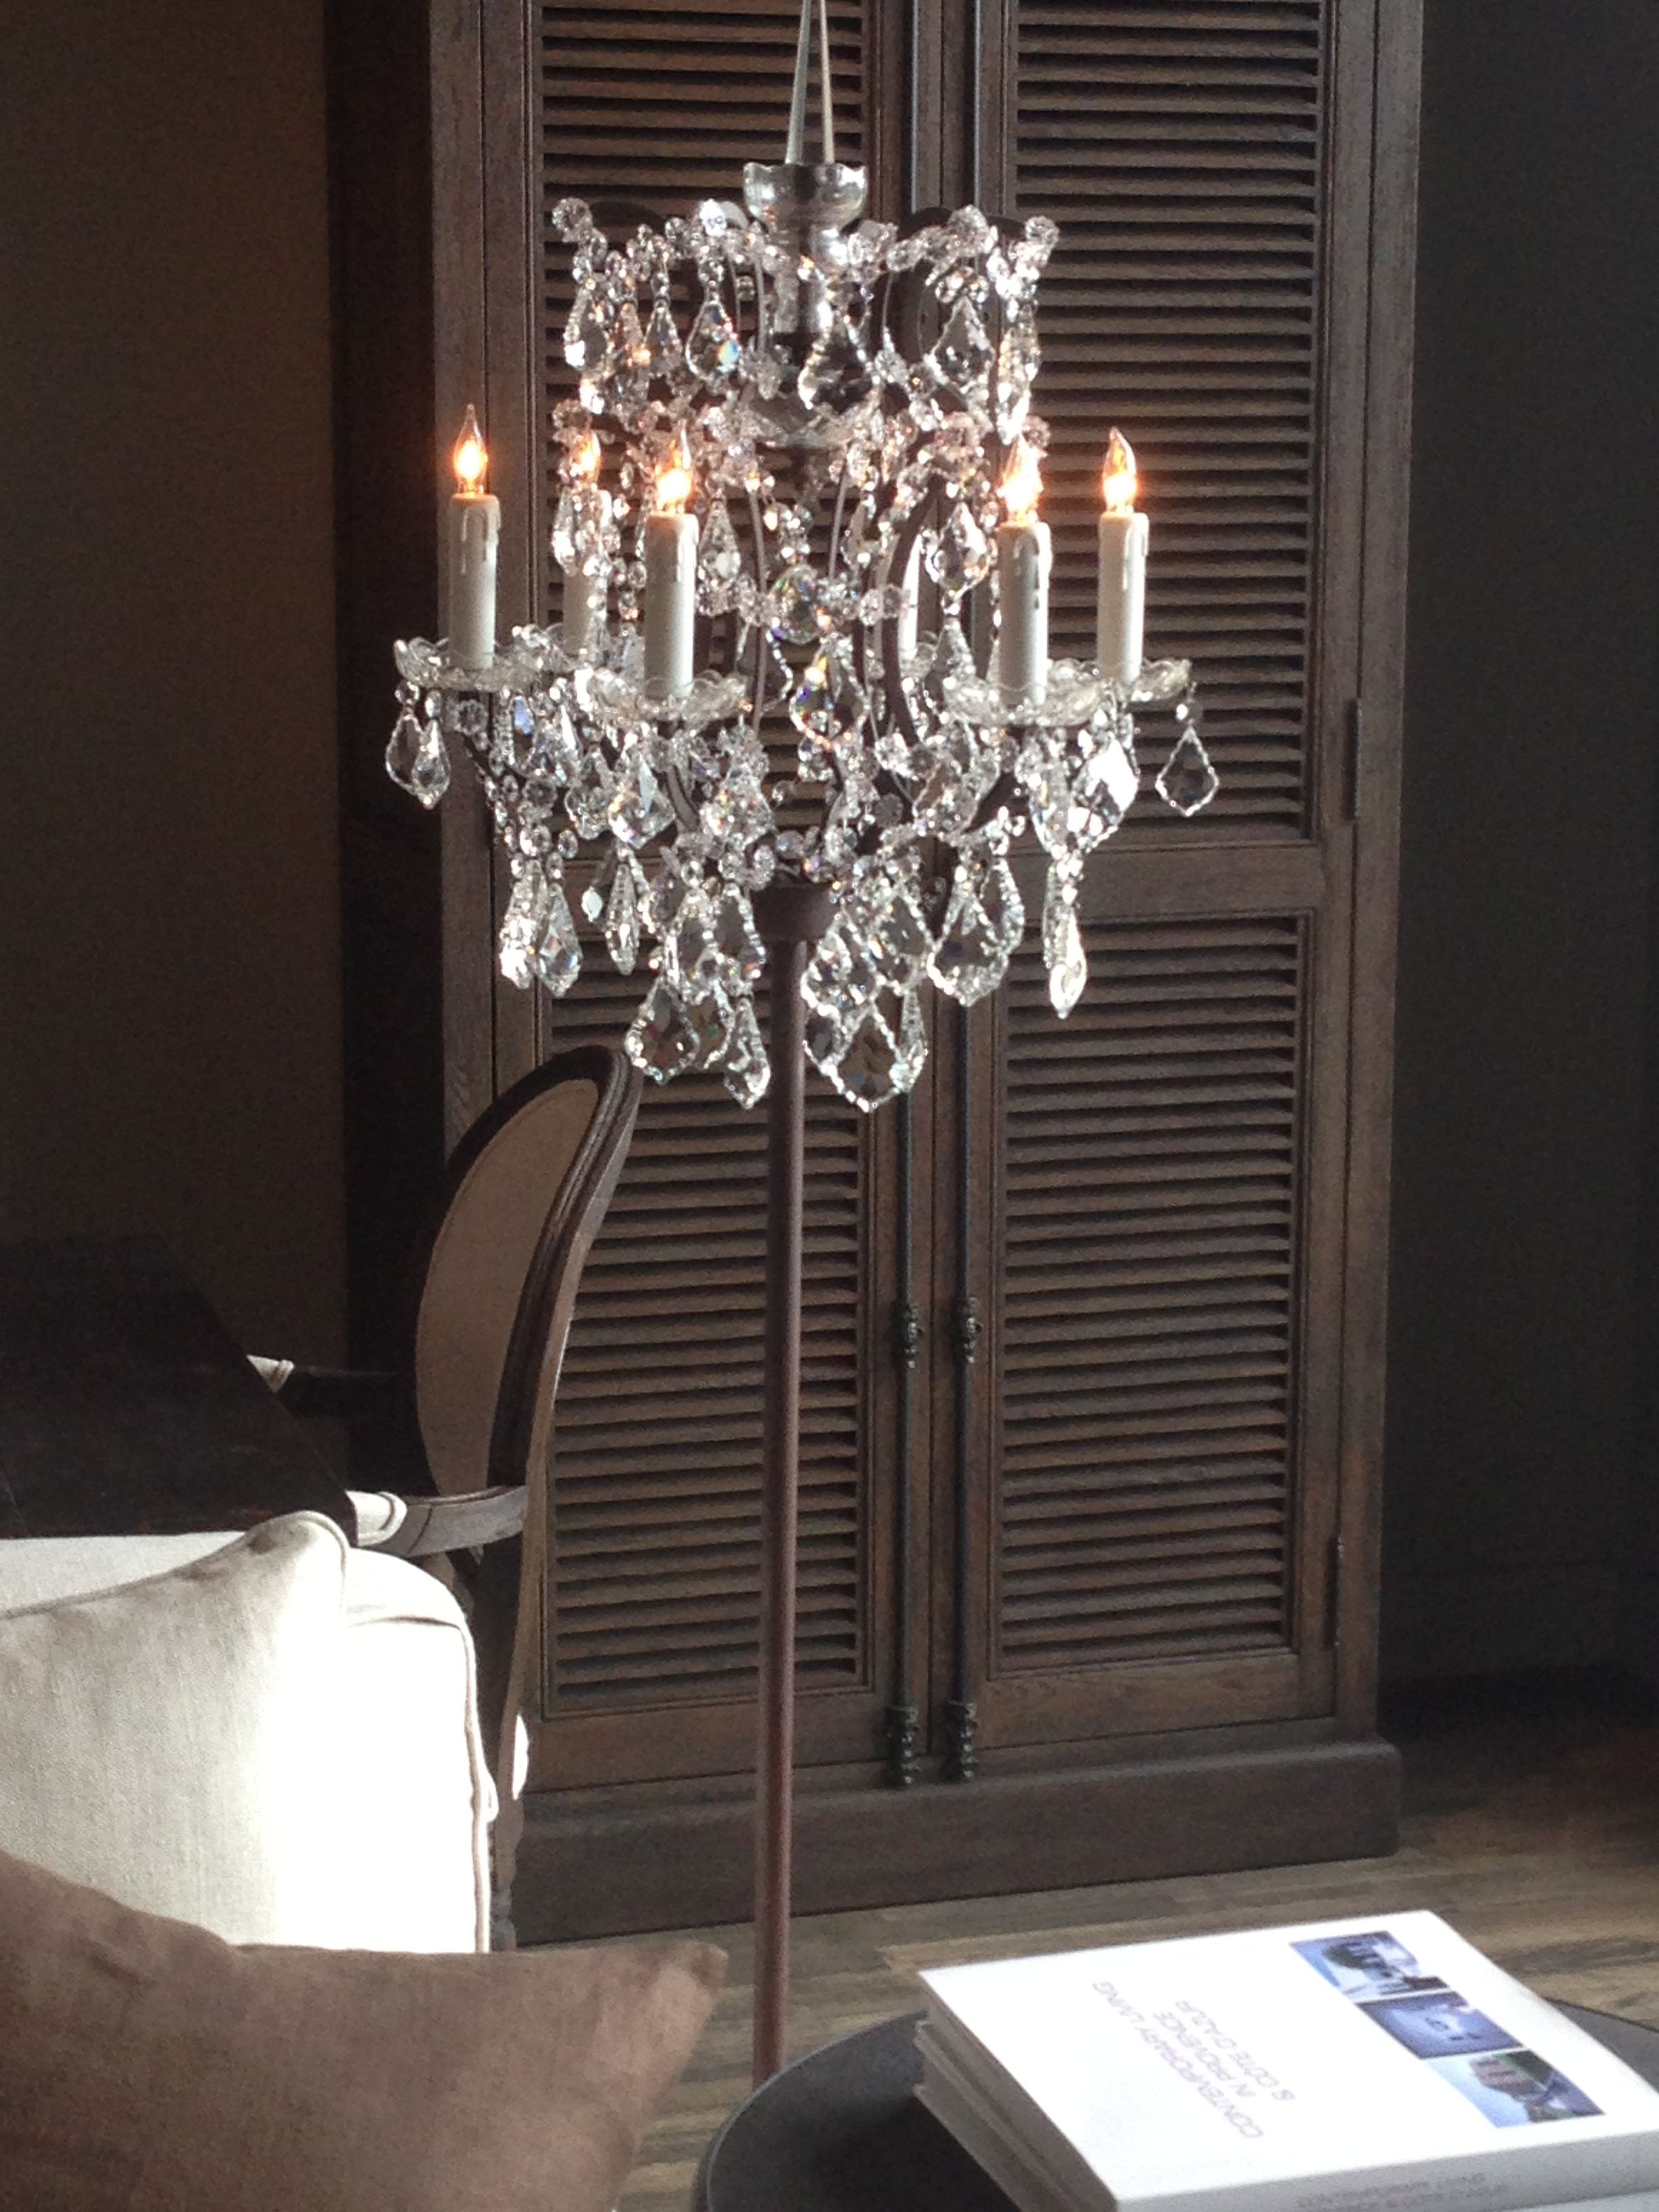 Chandelier Floor Lamp I Own This Floor Lamp And It Is So inside size 2448 X 3264